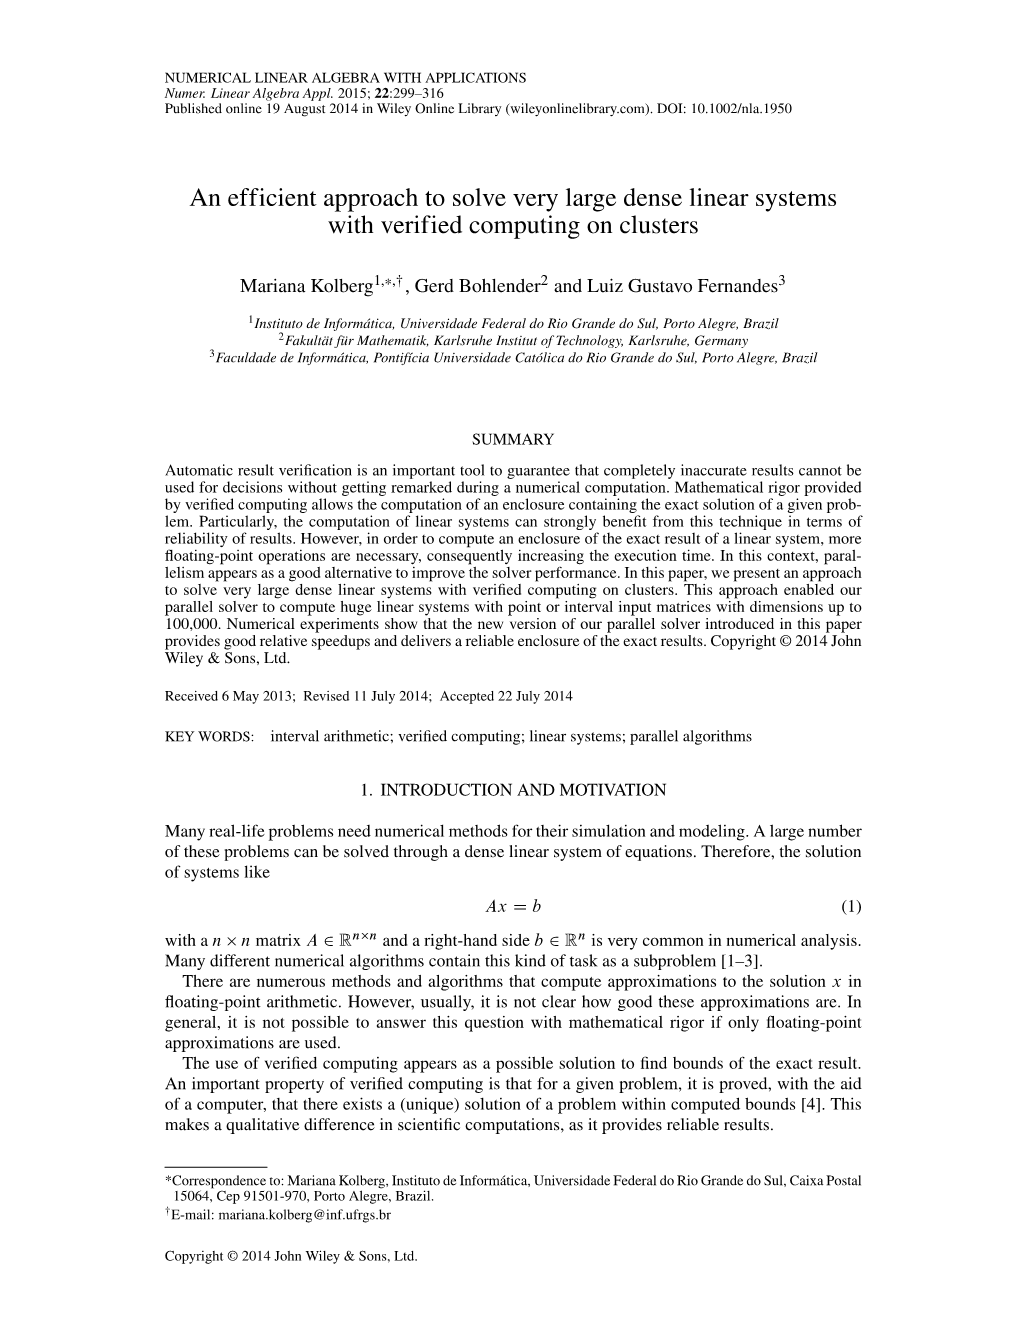 An Efficient Approach to Solve Very Large Dense Linear Systems with Verified Computing on Clusters